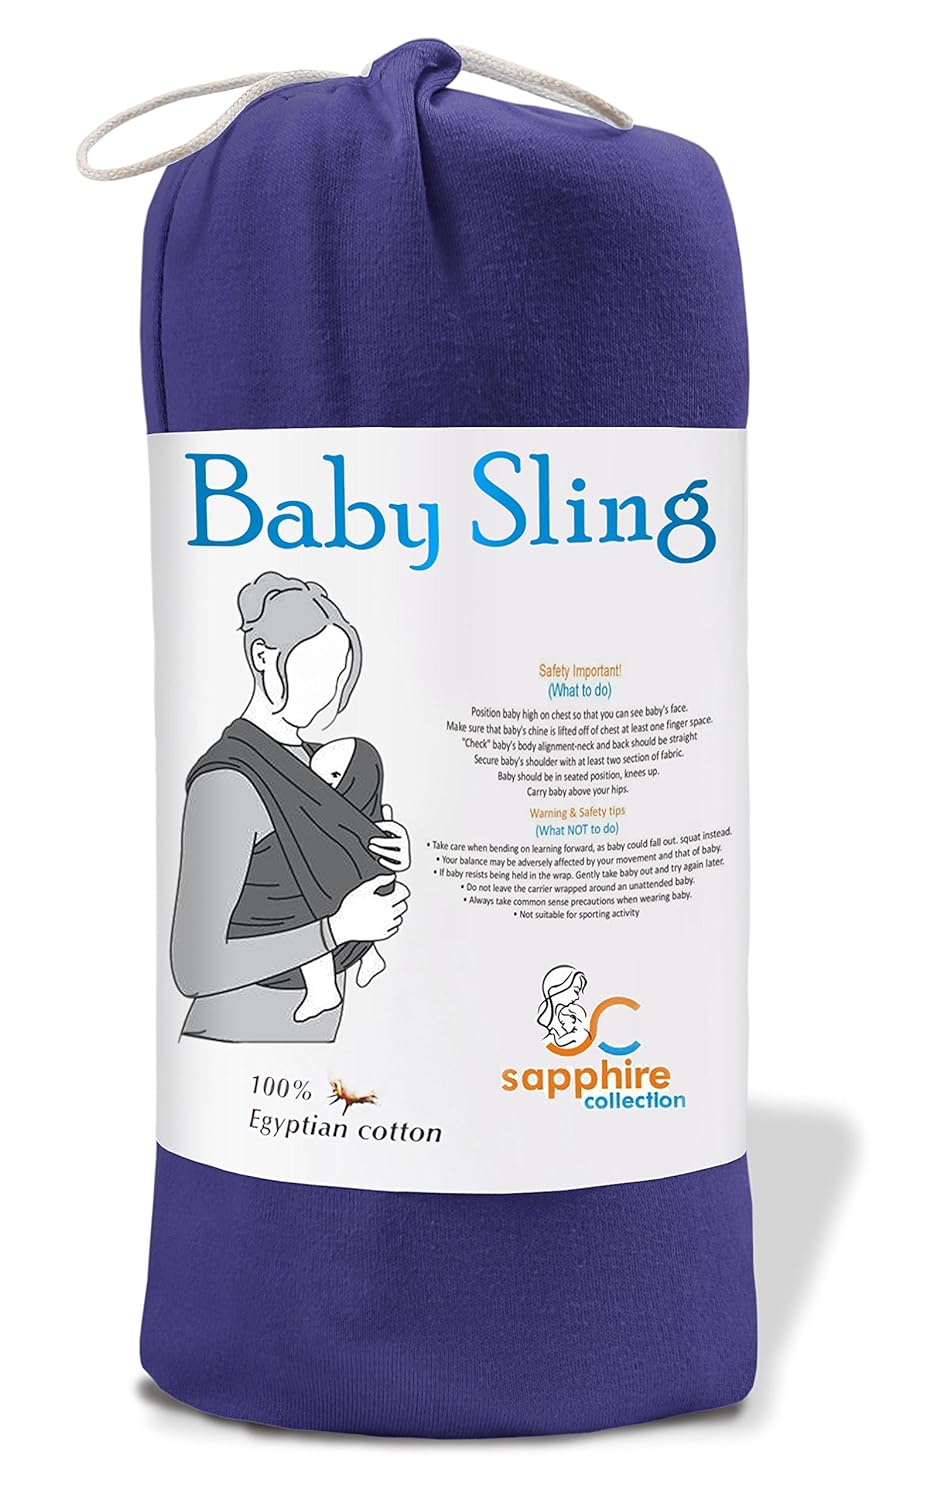 Sapphire Collection Baby Carrier Sling Stretchy Maternity Rage Cloth – Extra Soft and Light Weight, Quiet – Birth to 3 yrs navy blue